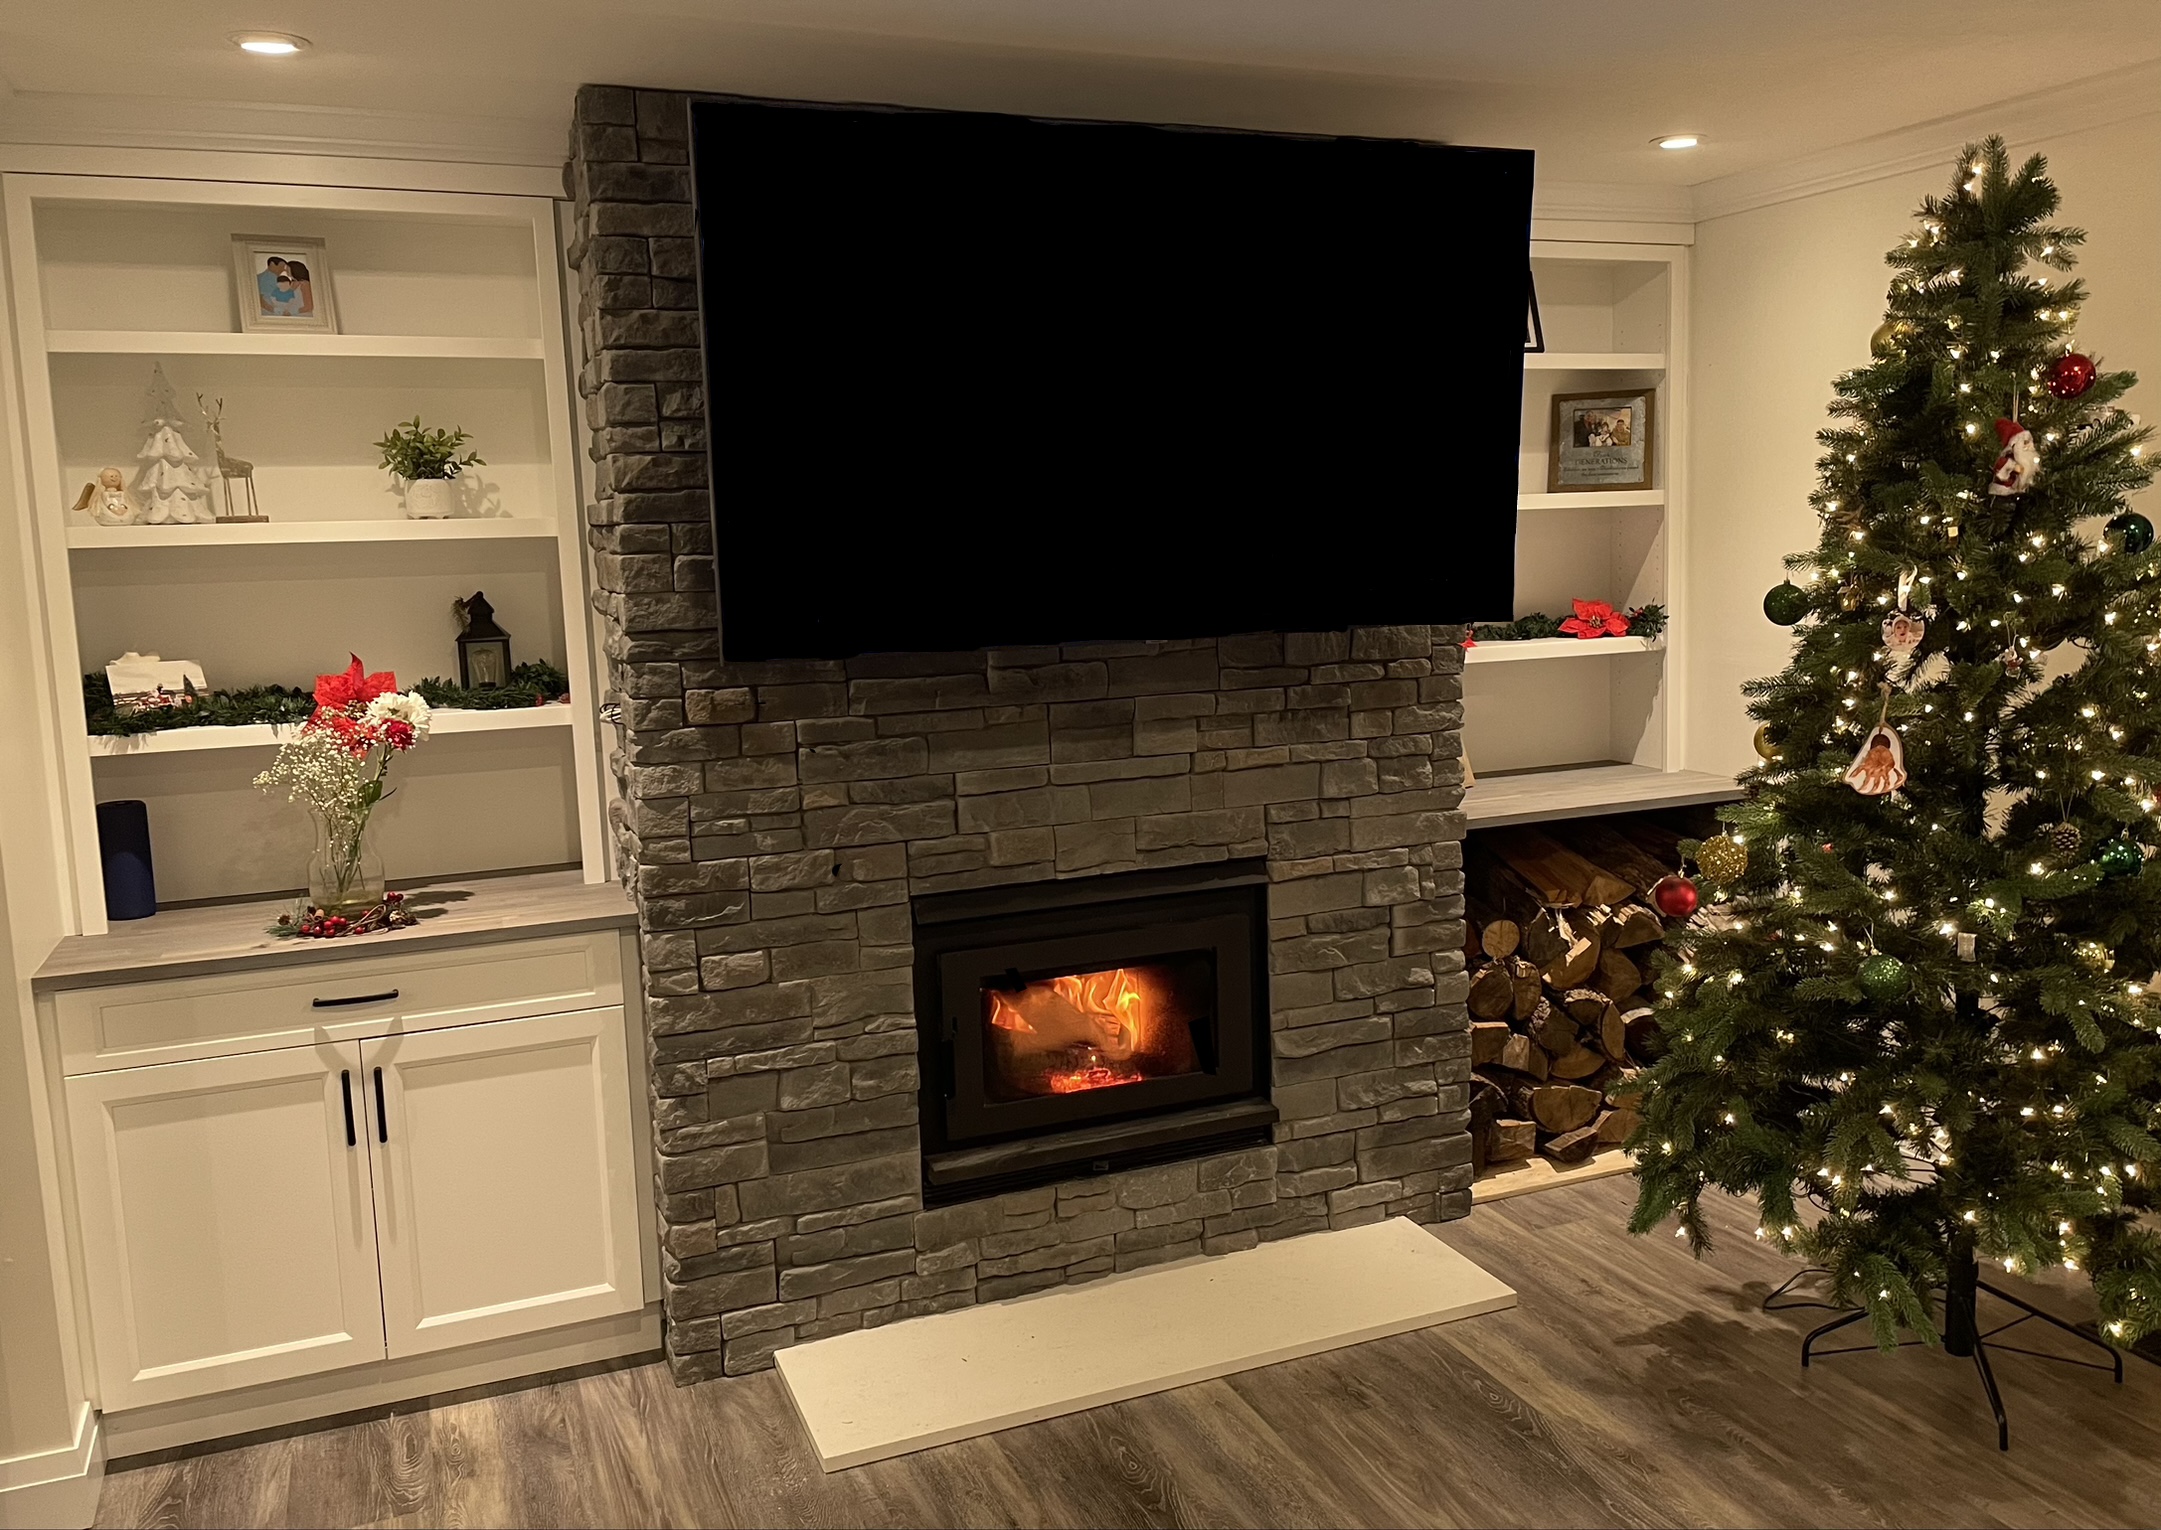 Fireplace after full kitchen renovation with custom cabinetry by SSP Cabinetry